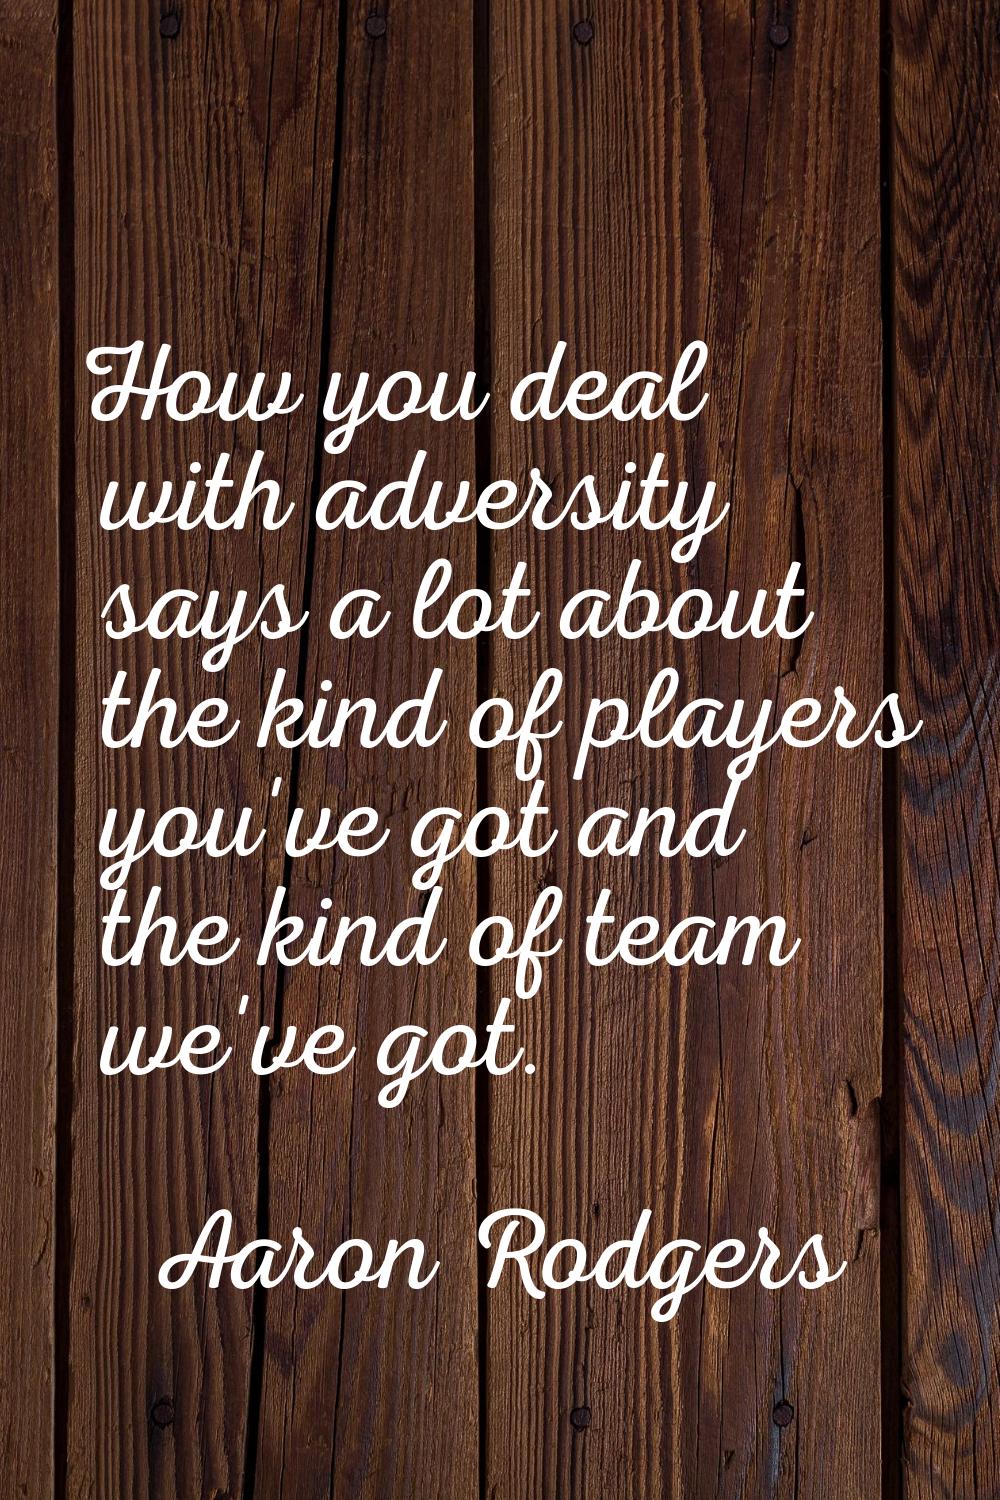 How you deal with adversity says a lot about the kind of players you've got and the kind of team we